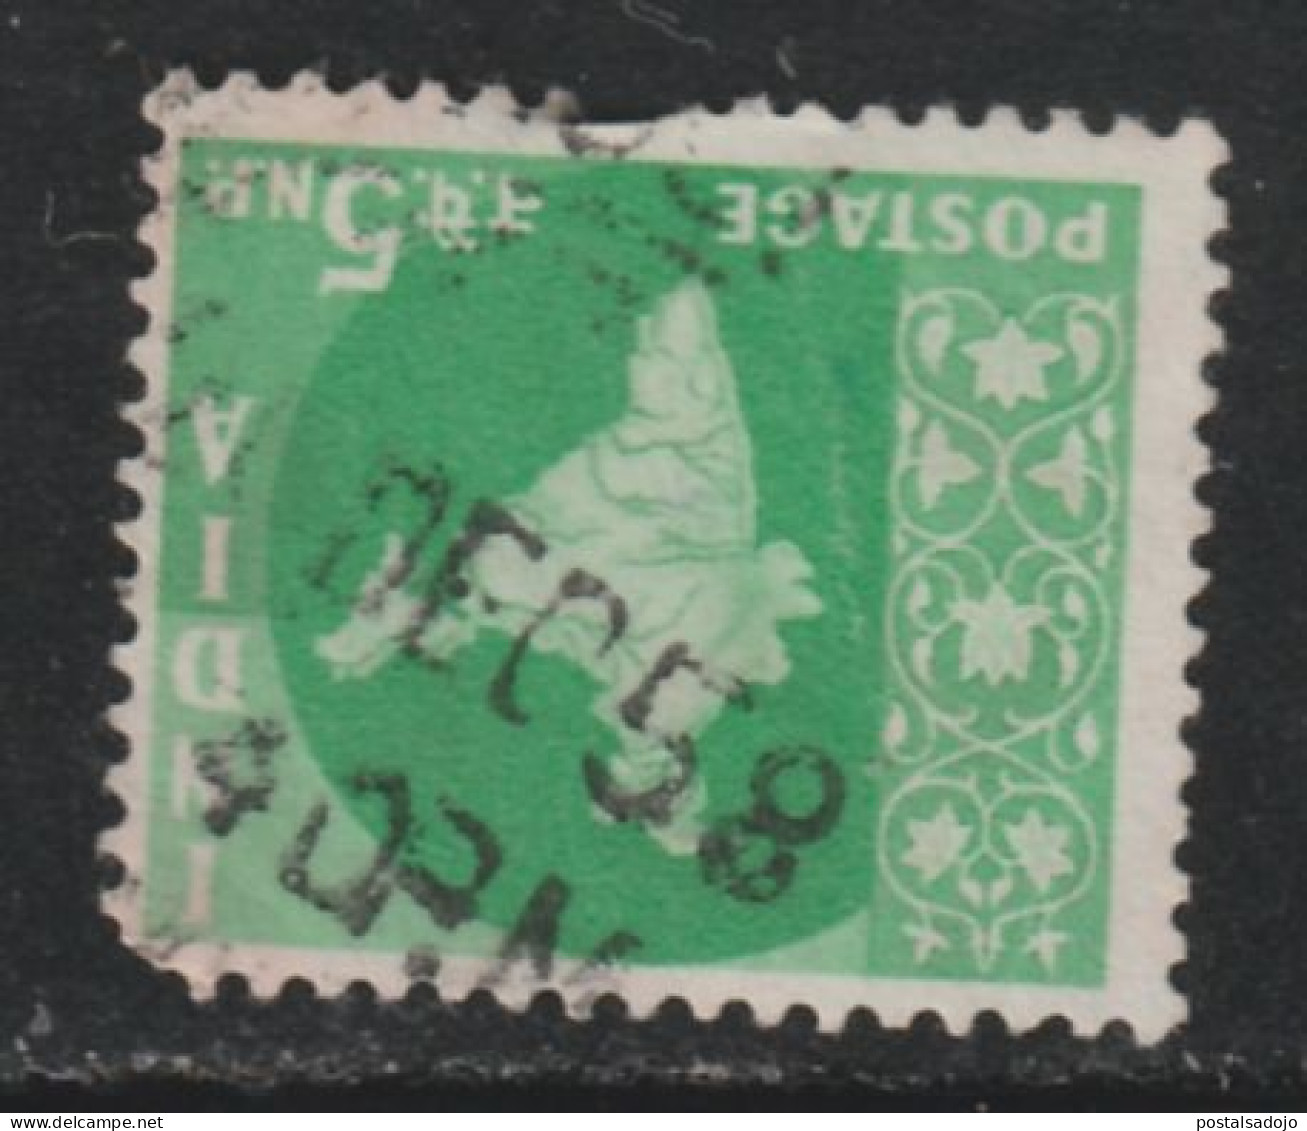 INDE 562 // YVERT 74  // 1957-58 - Used Stamps